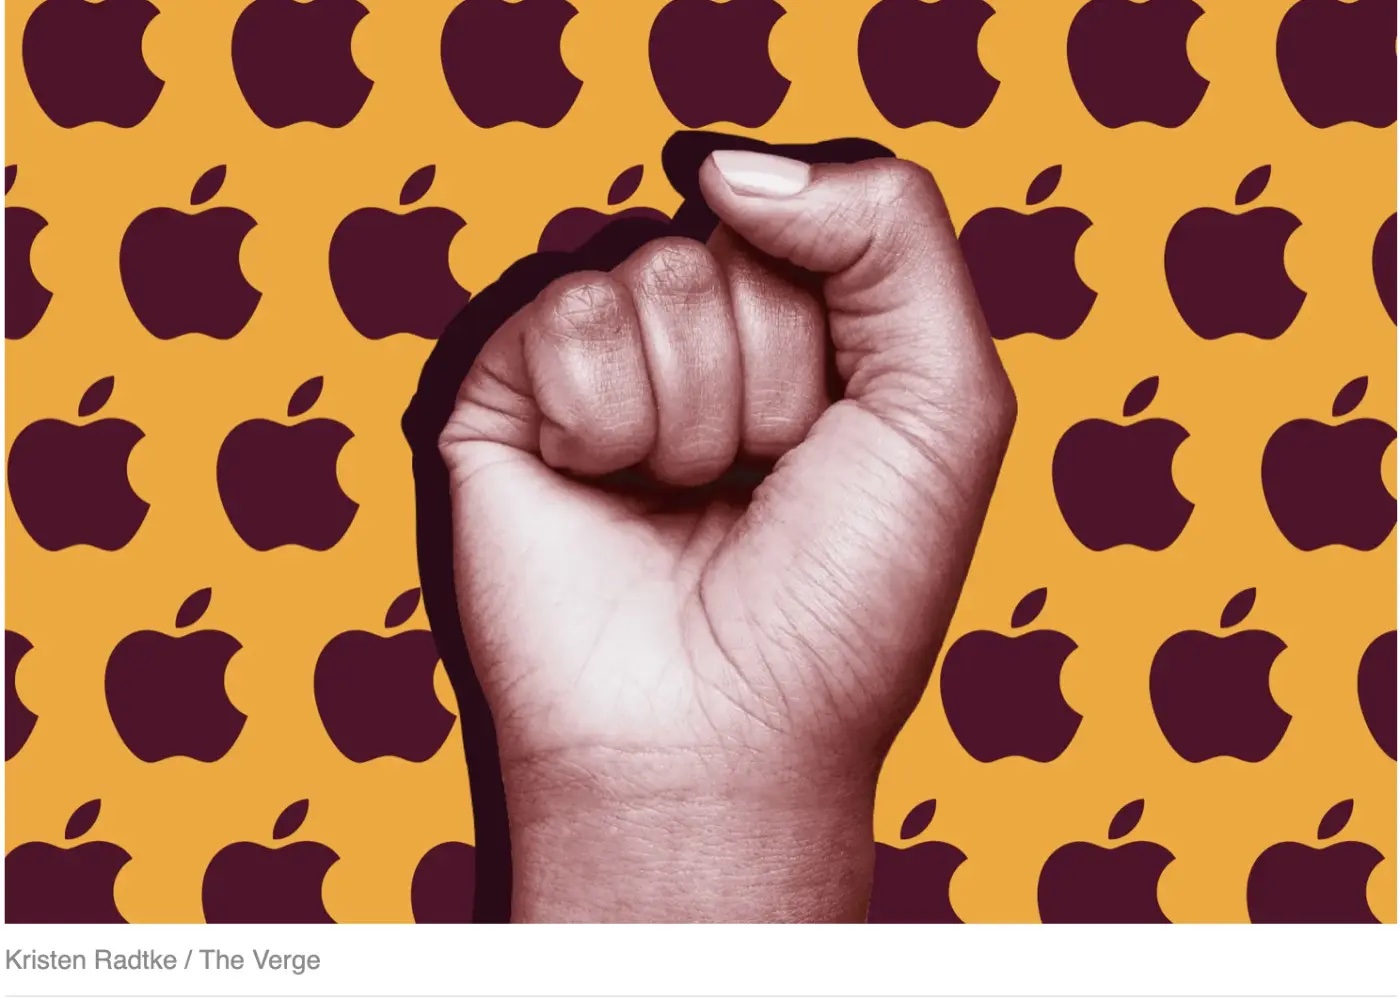 Labor group withdraws request for unionization election because of Apple’s ‘illegal’ union-busting activities